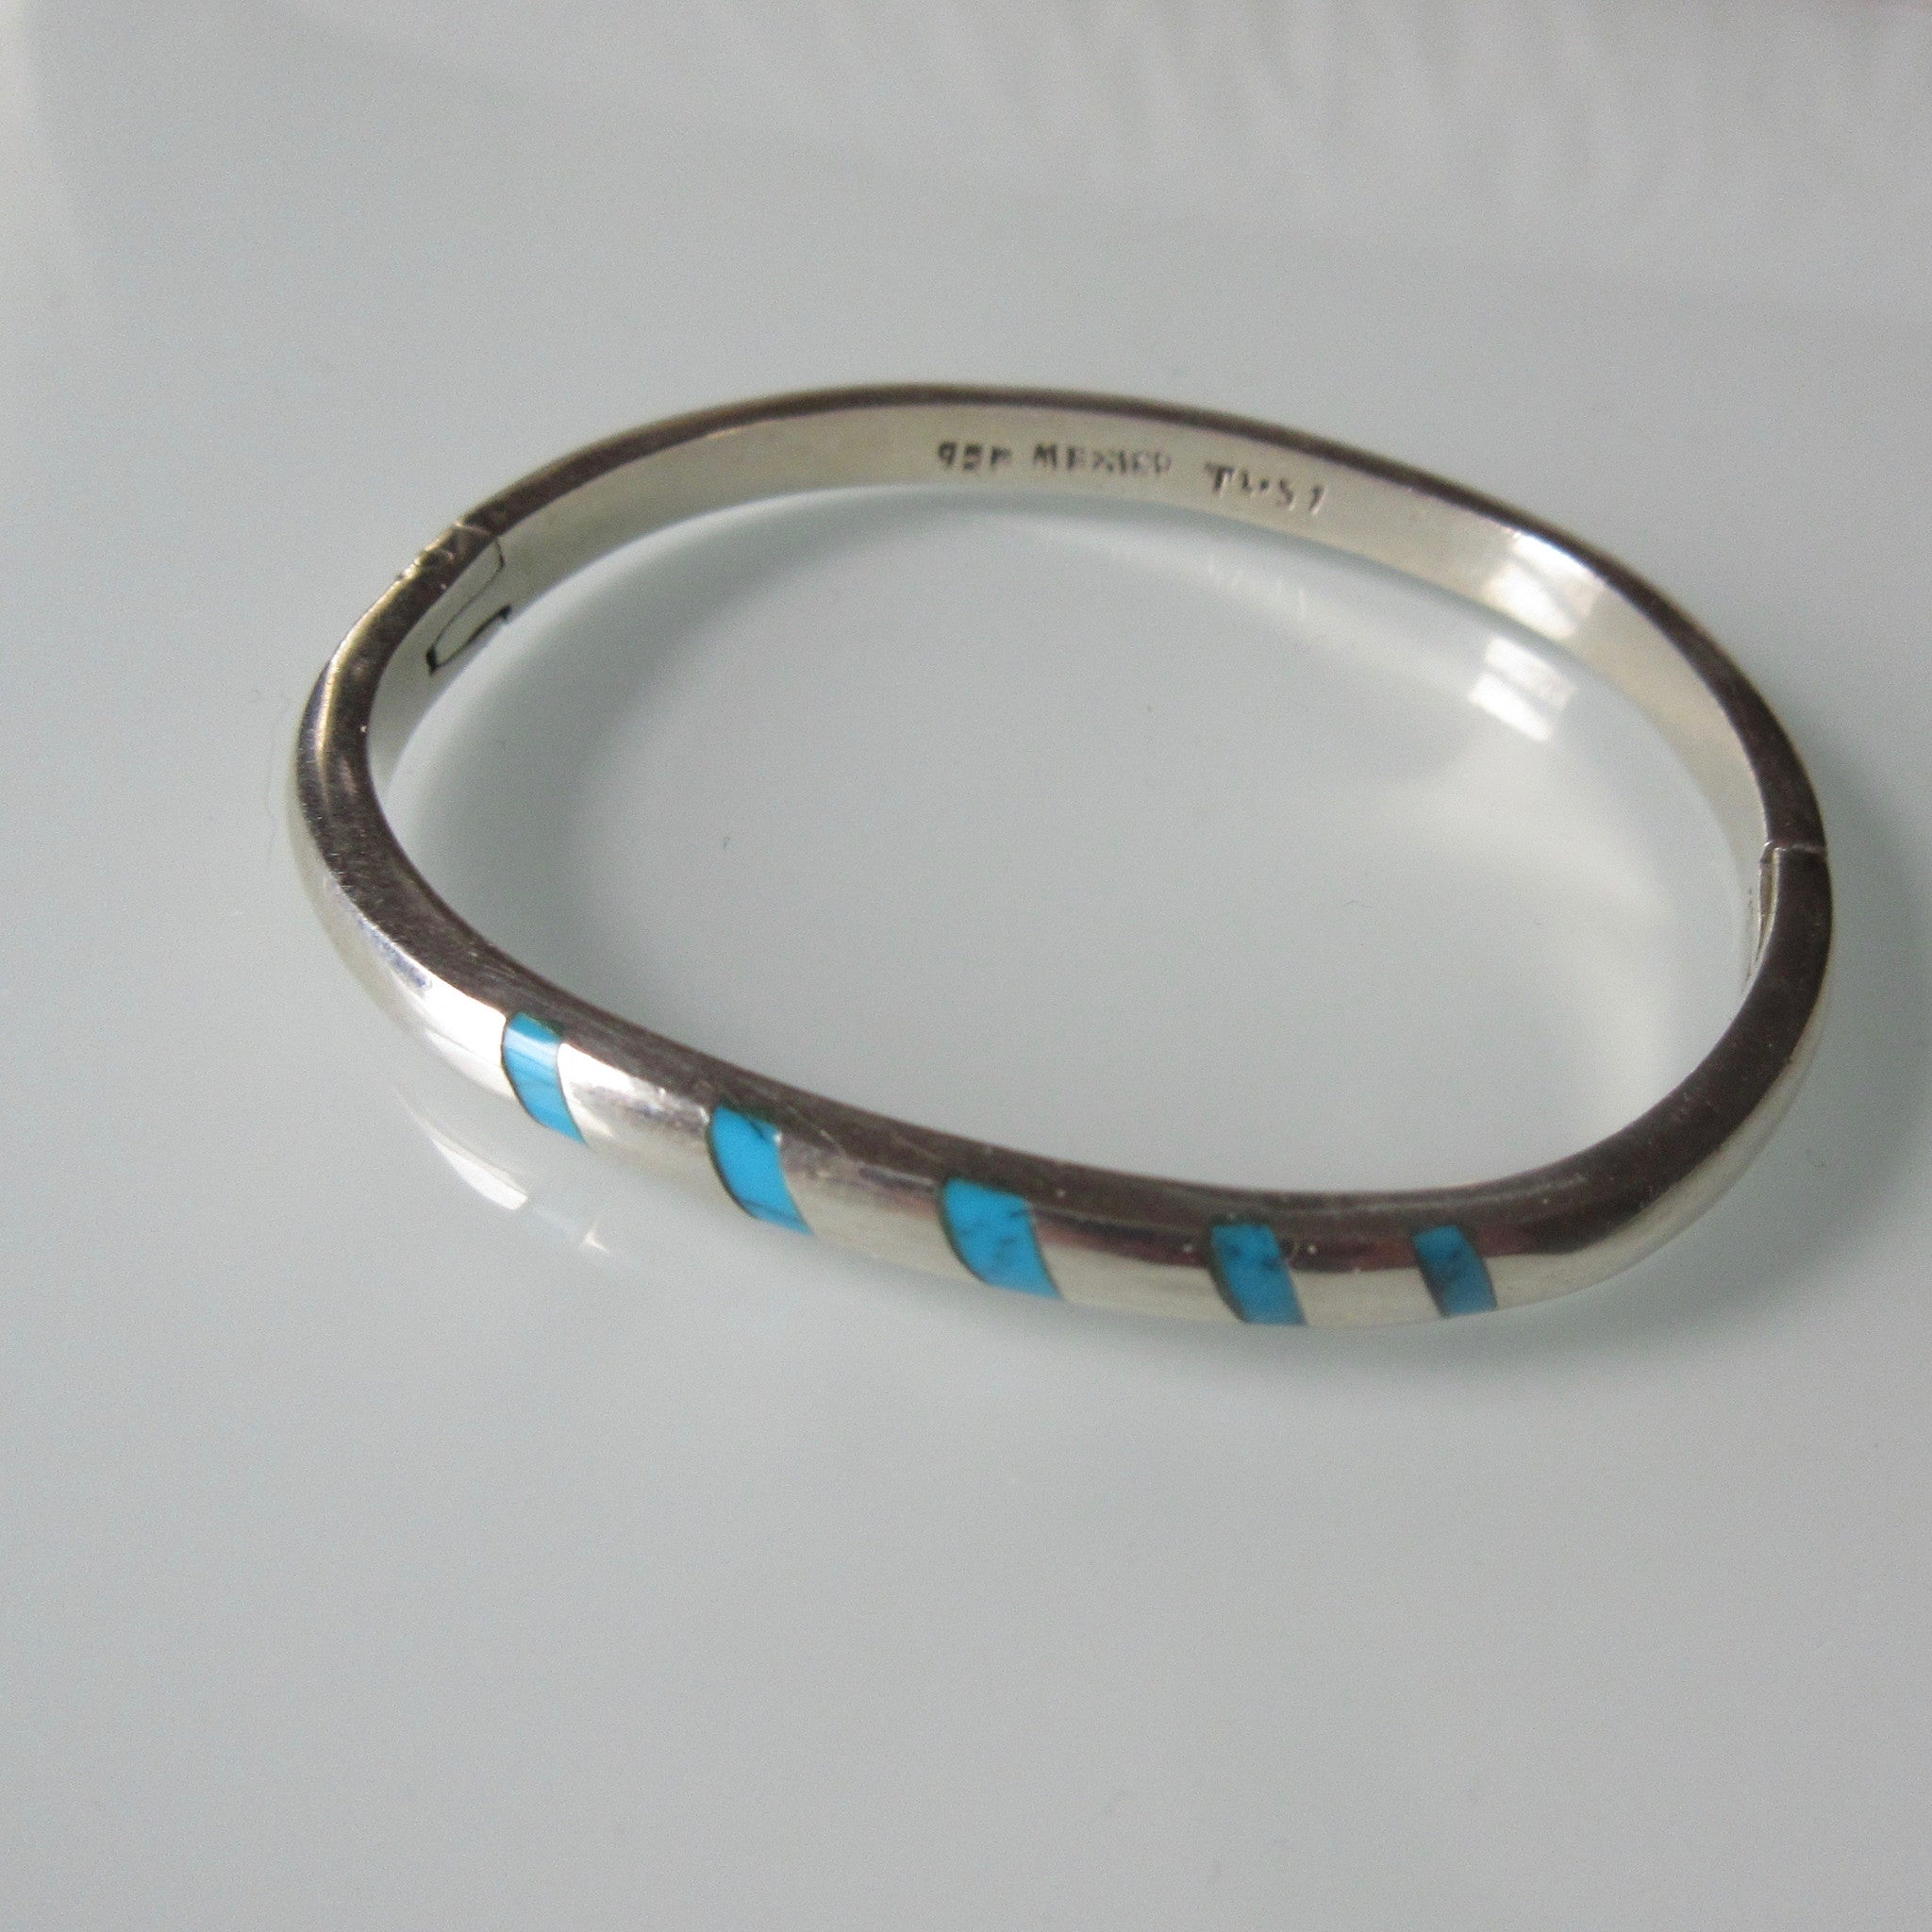 Navajo Style Sterling Silver Turquoise Hinged Bangle